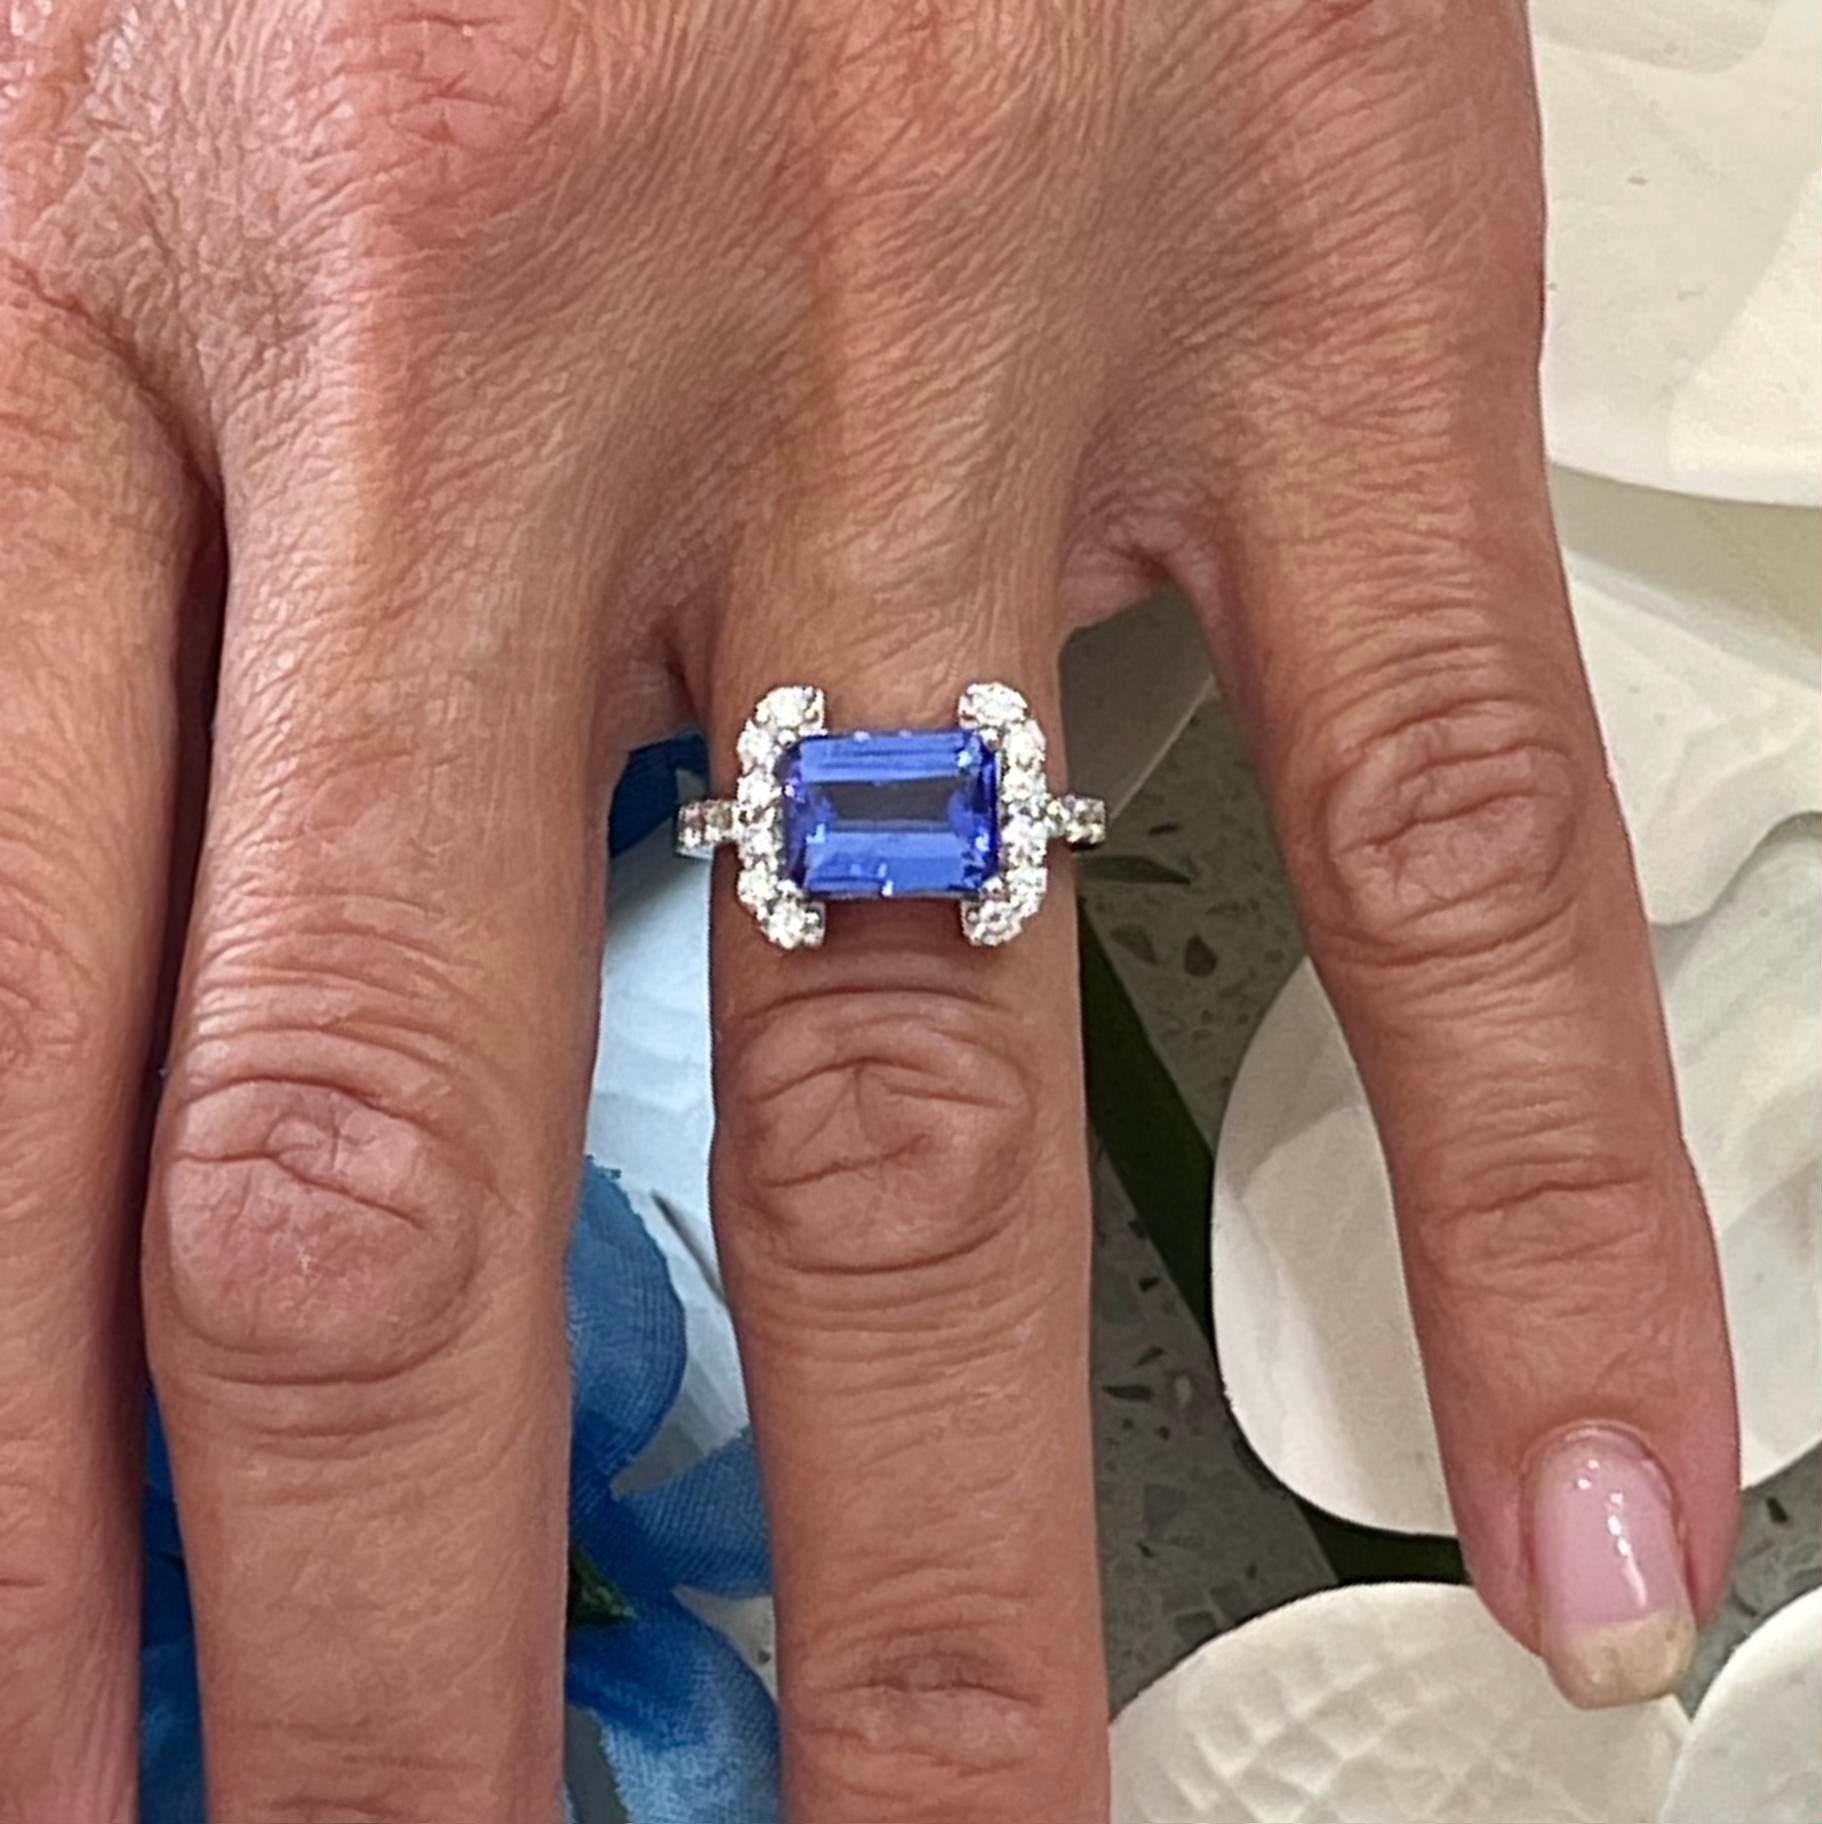 Natural Tanzanite Diamond Ring Size 6.5 14k W Gold 3.89 TCW Certified $4,790 217841

Nothing says, “I Love you” more than Diamonds and Pearls!

This Tanzanite ring has been Certified, Inspected, and Appraised by Gemological Appraisal